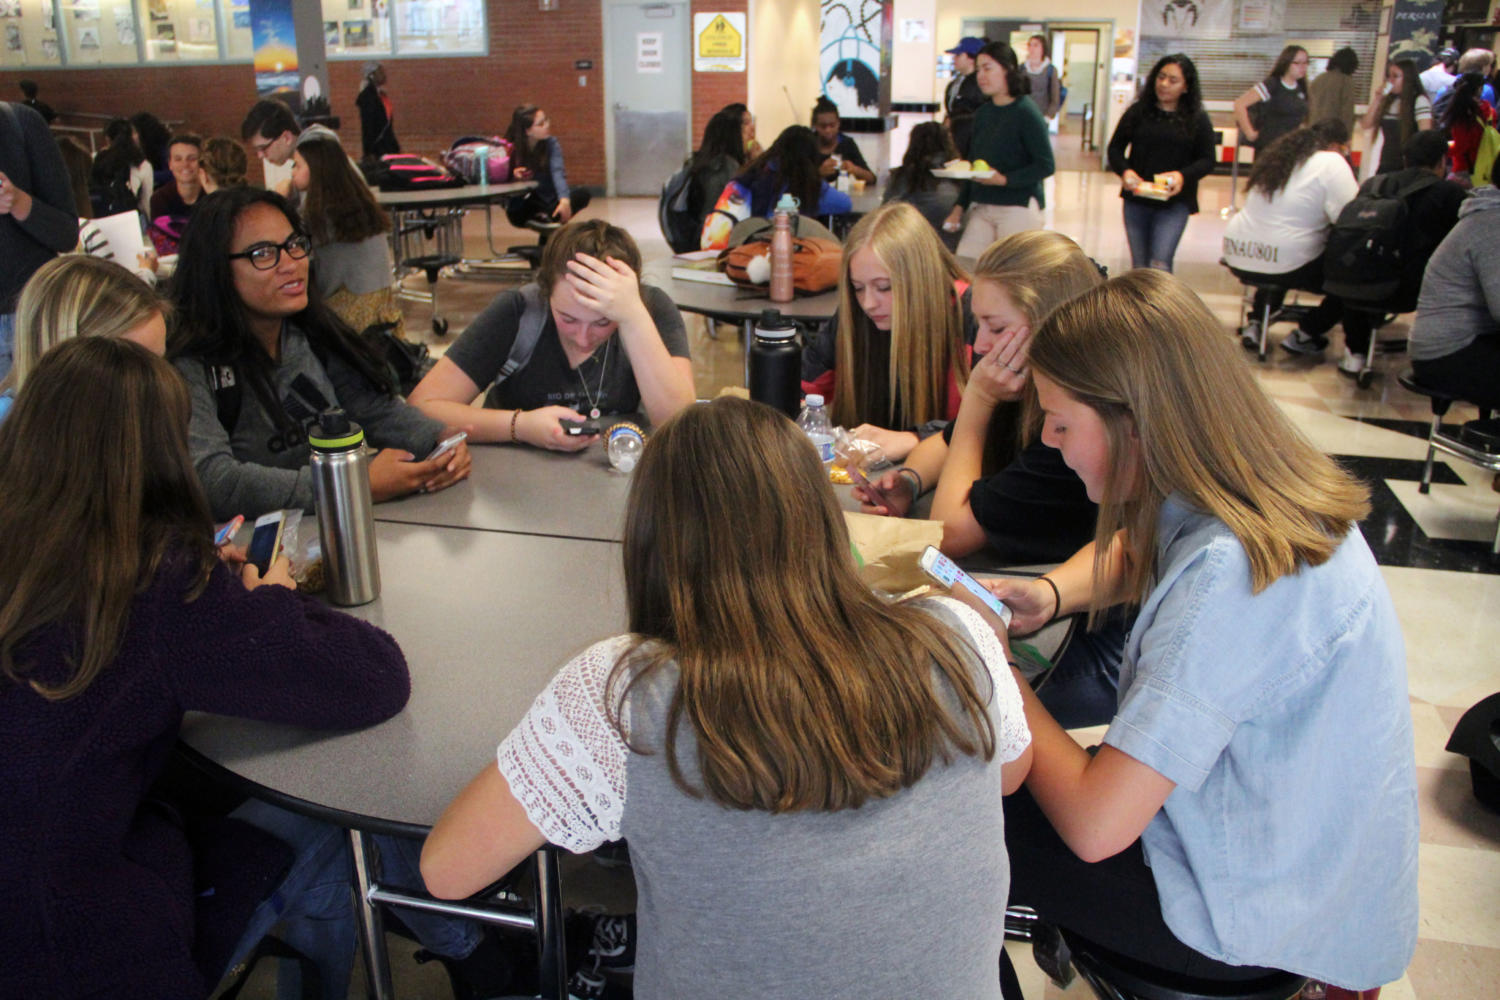 Students distracted by their phones at the lunch table